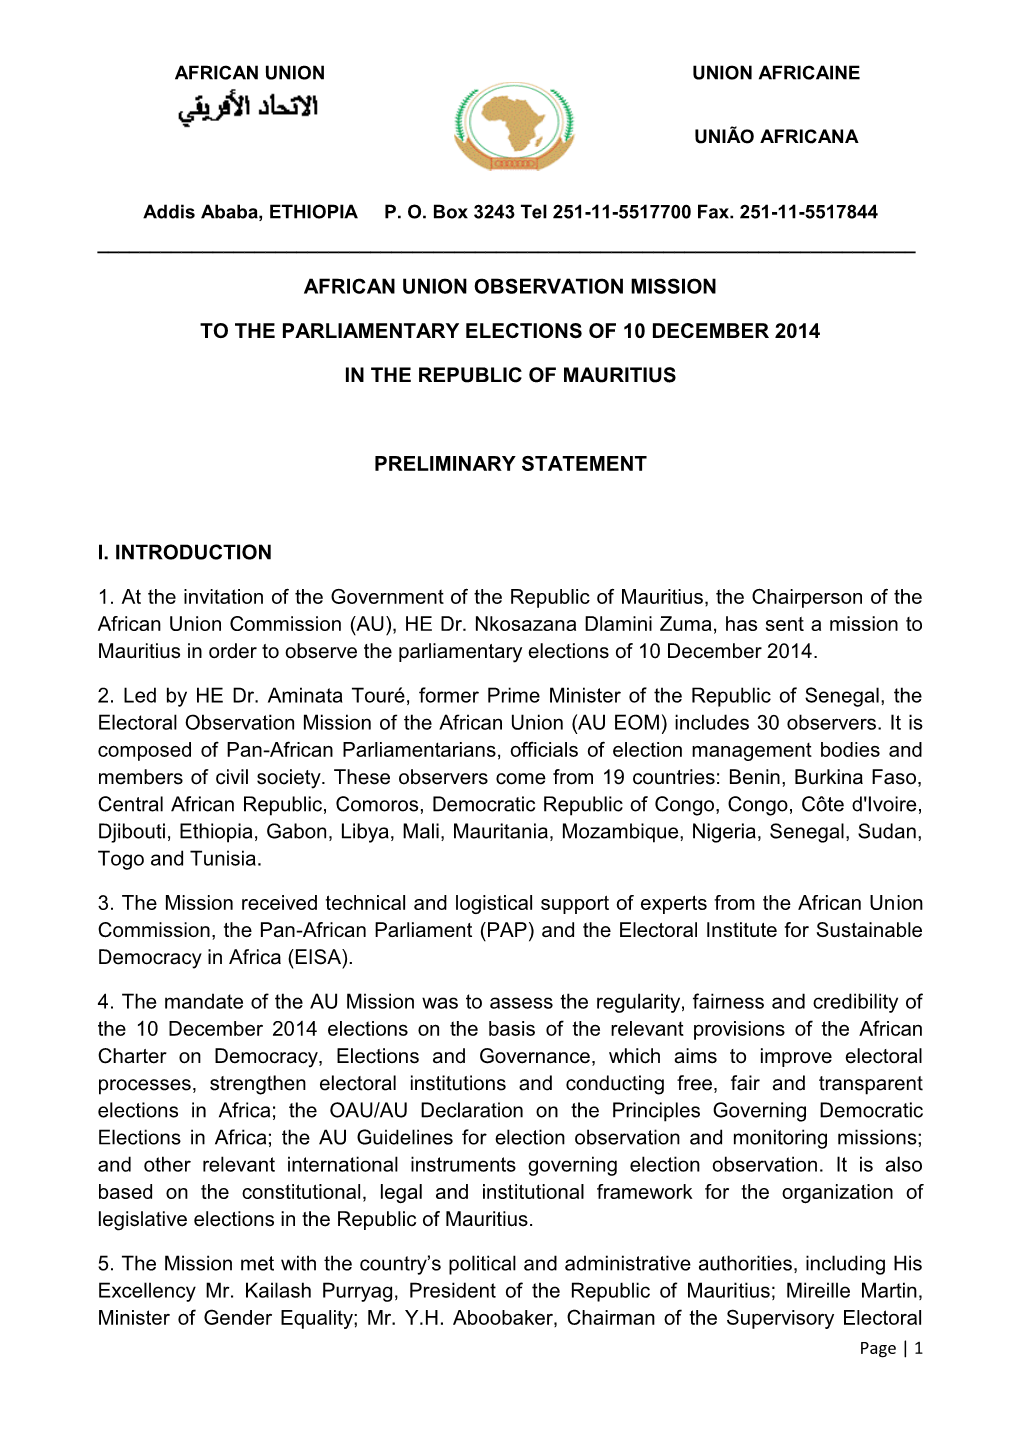 African Union Observation Mission to the Parliamentary Elections of 10 December 2014 in the Republic of Mauritius Preliminary St